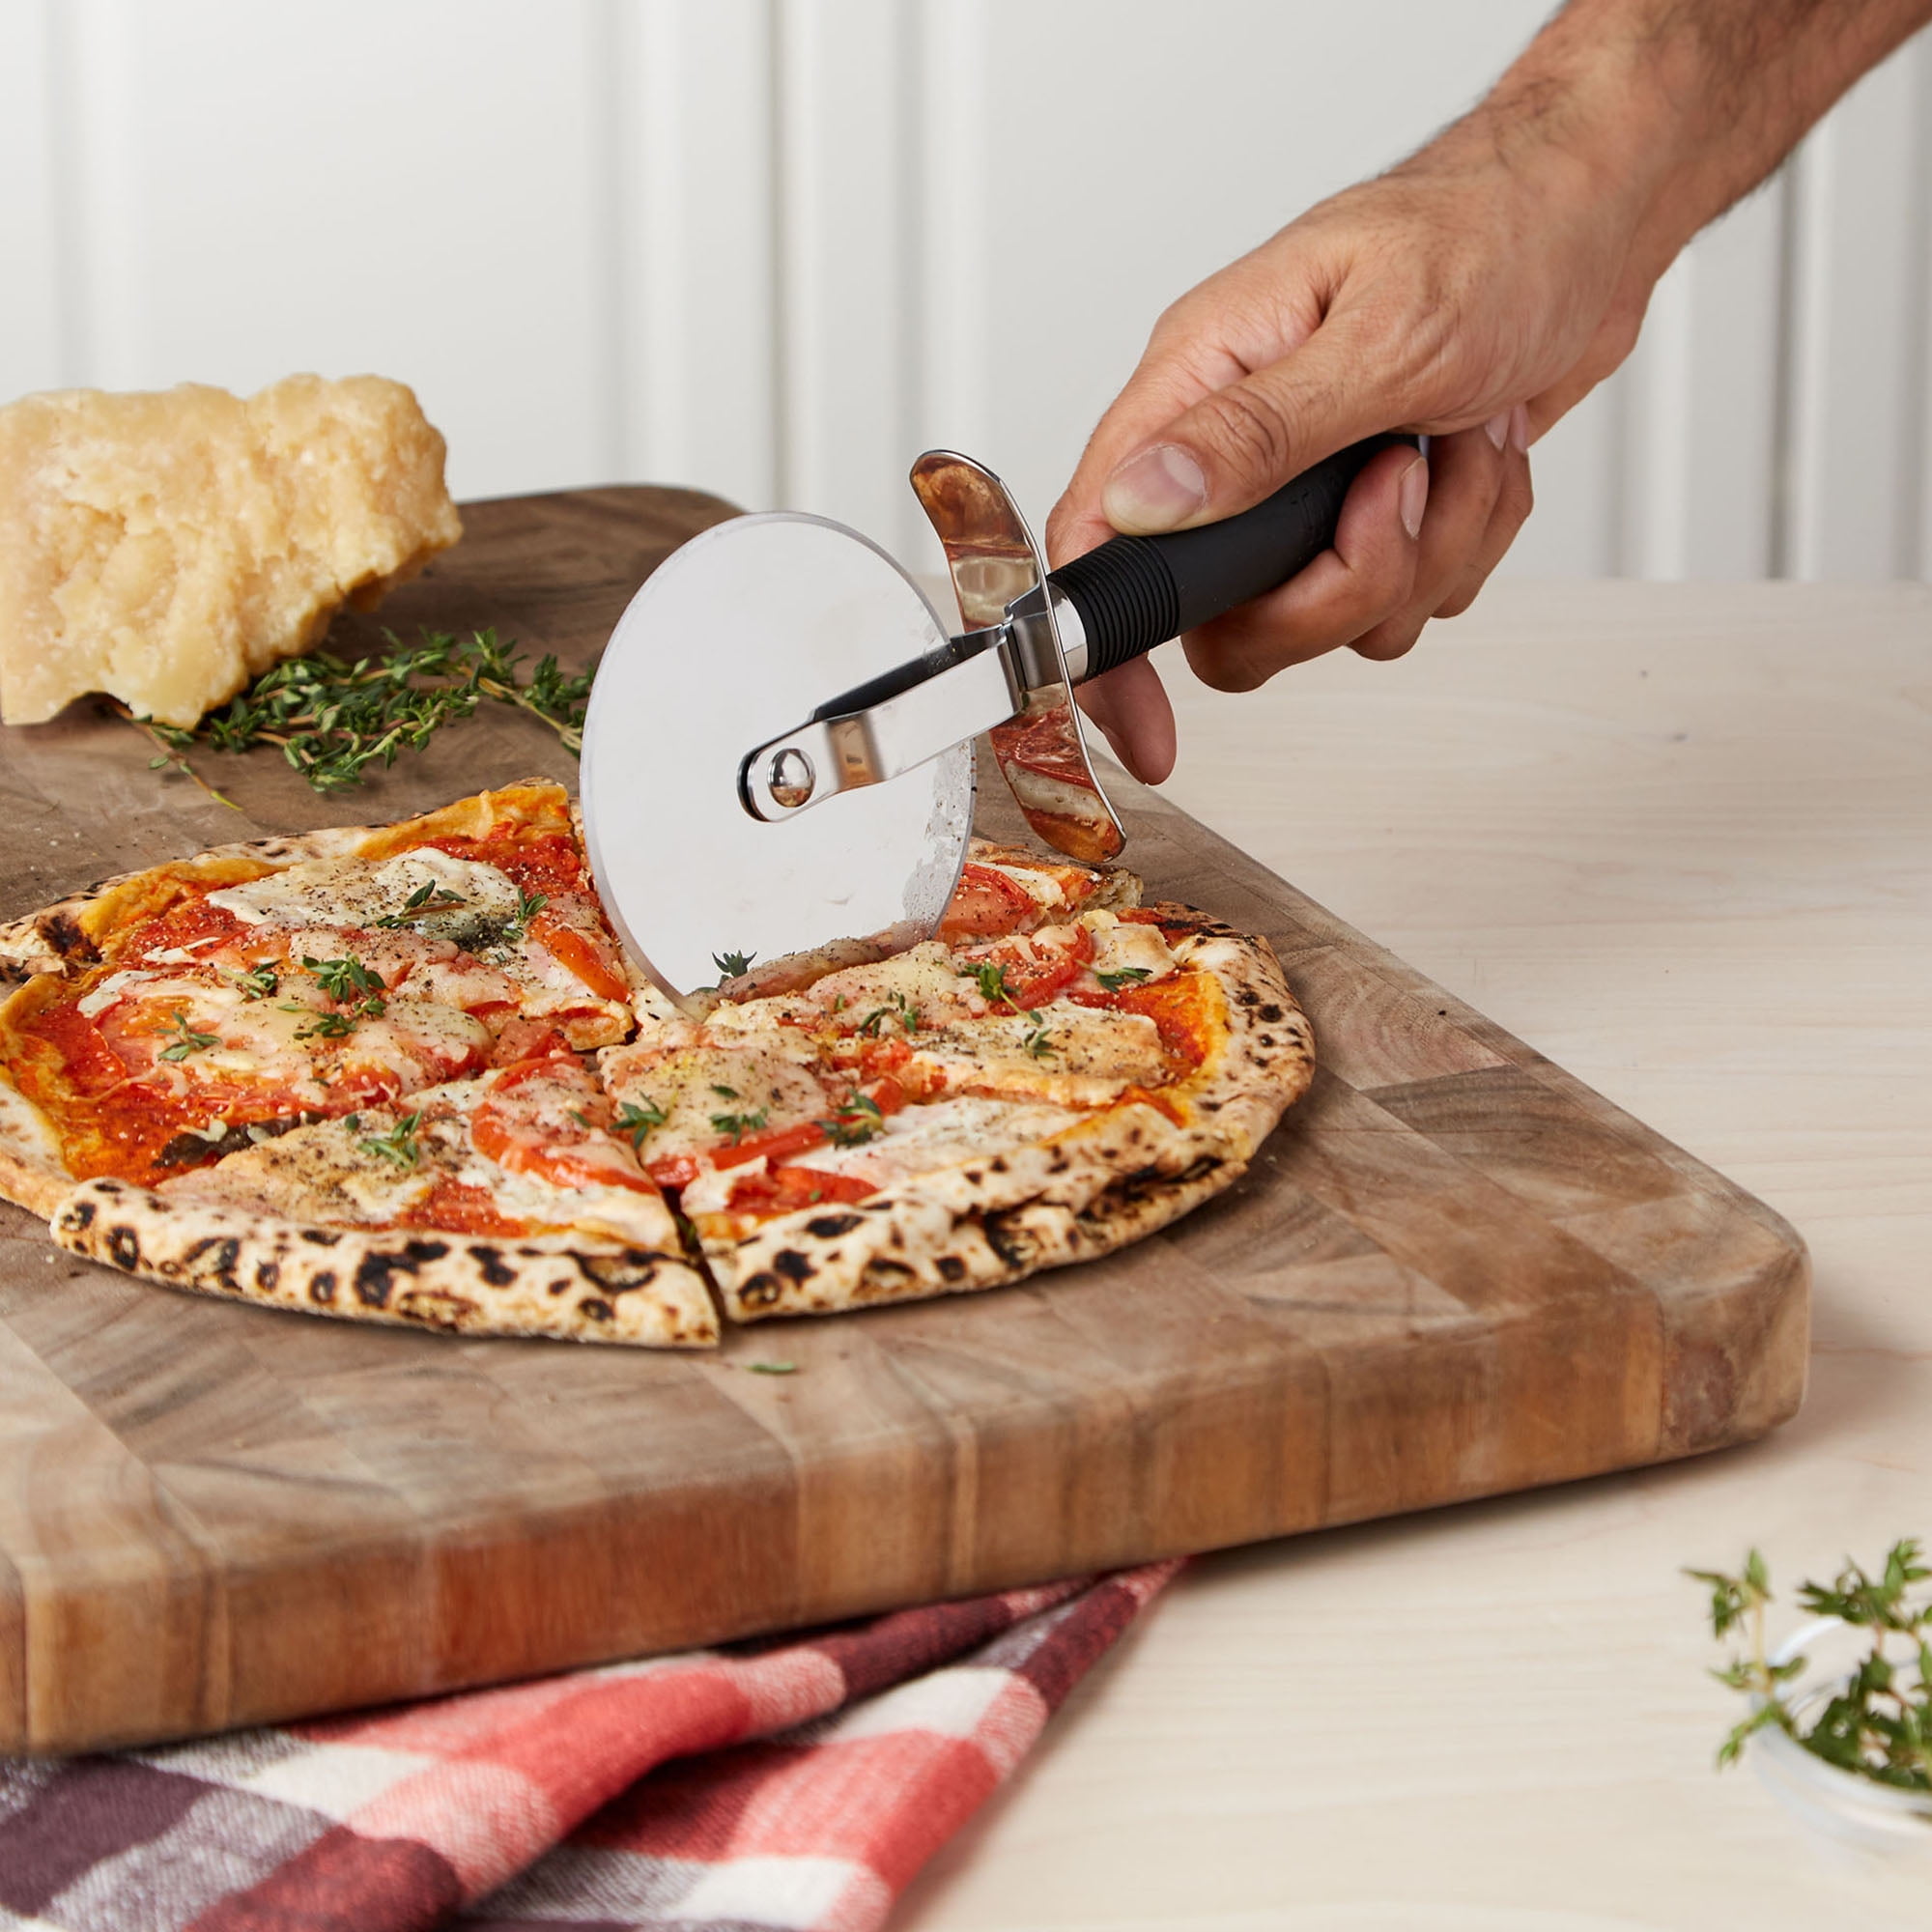 Crate & Barrel Black Soft-Touch Pizza Wheel + Reviews